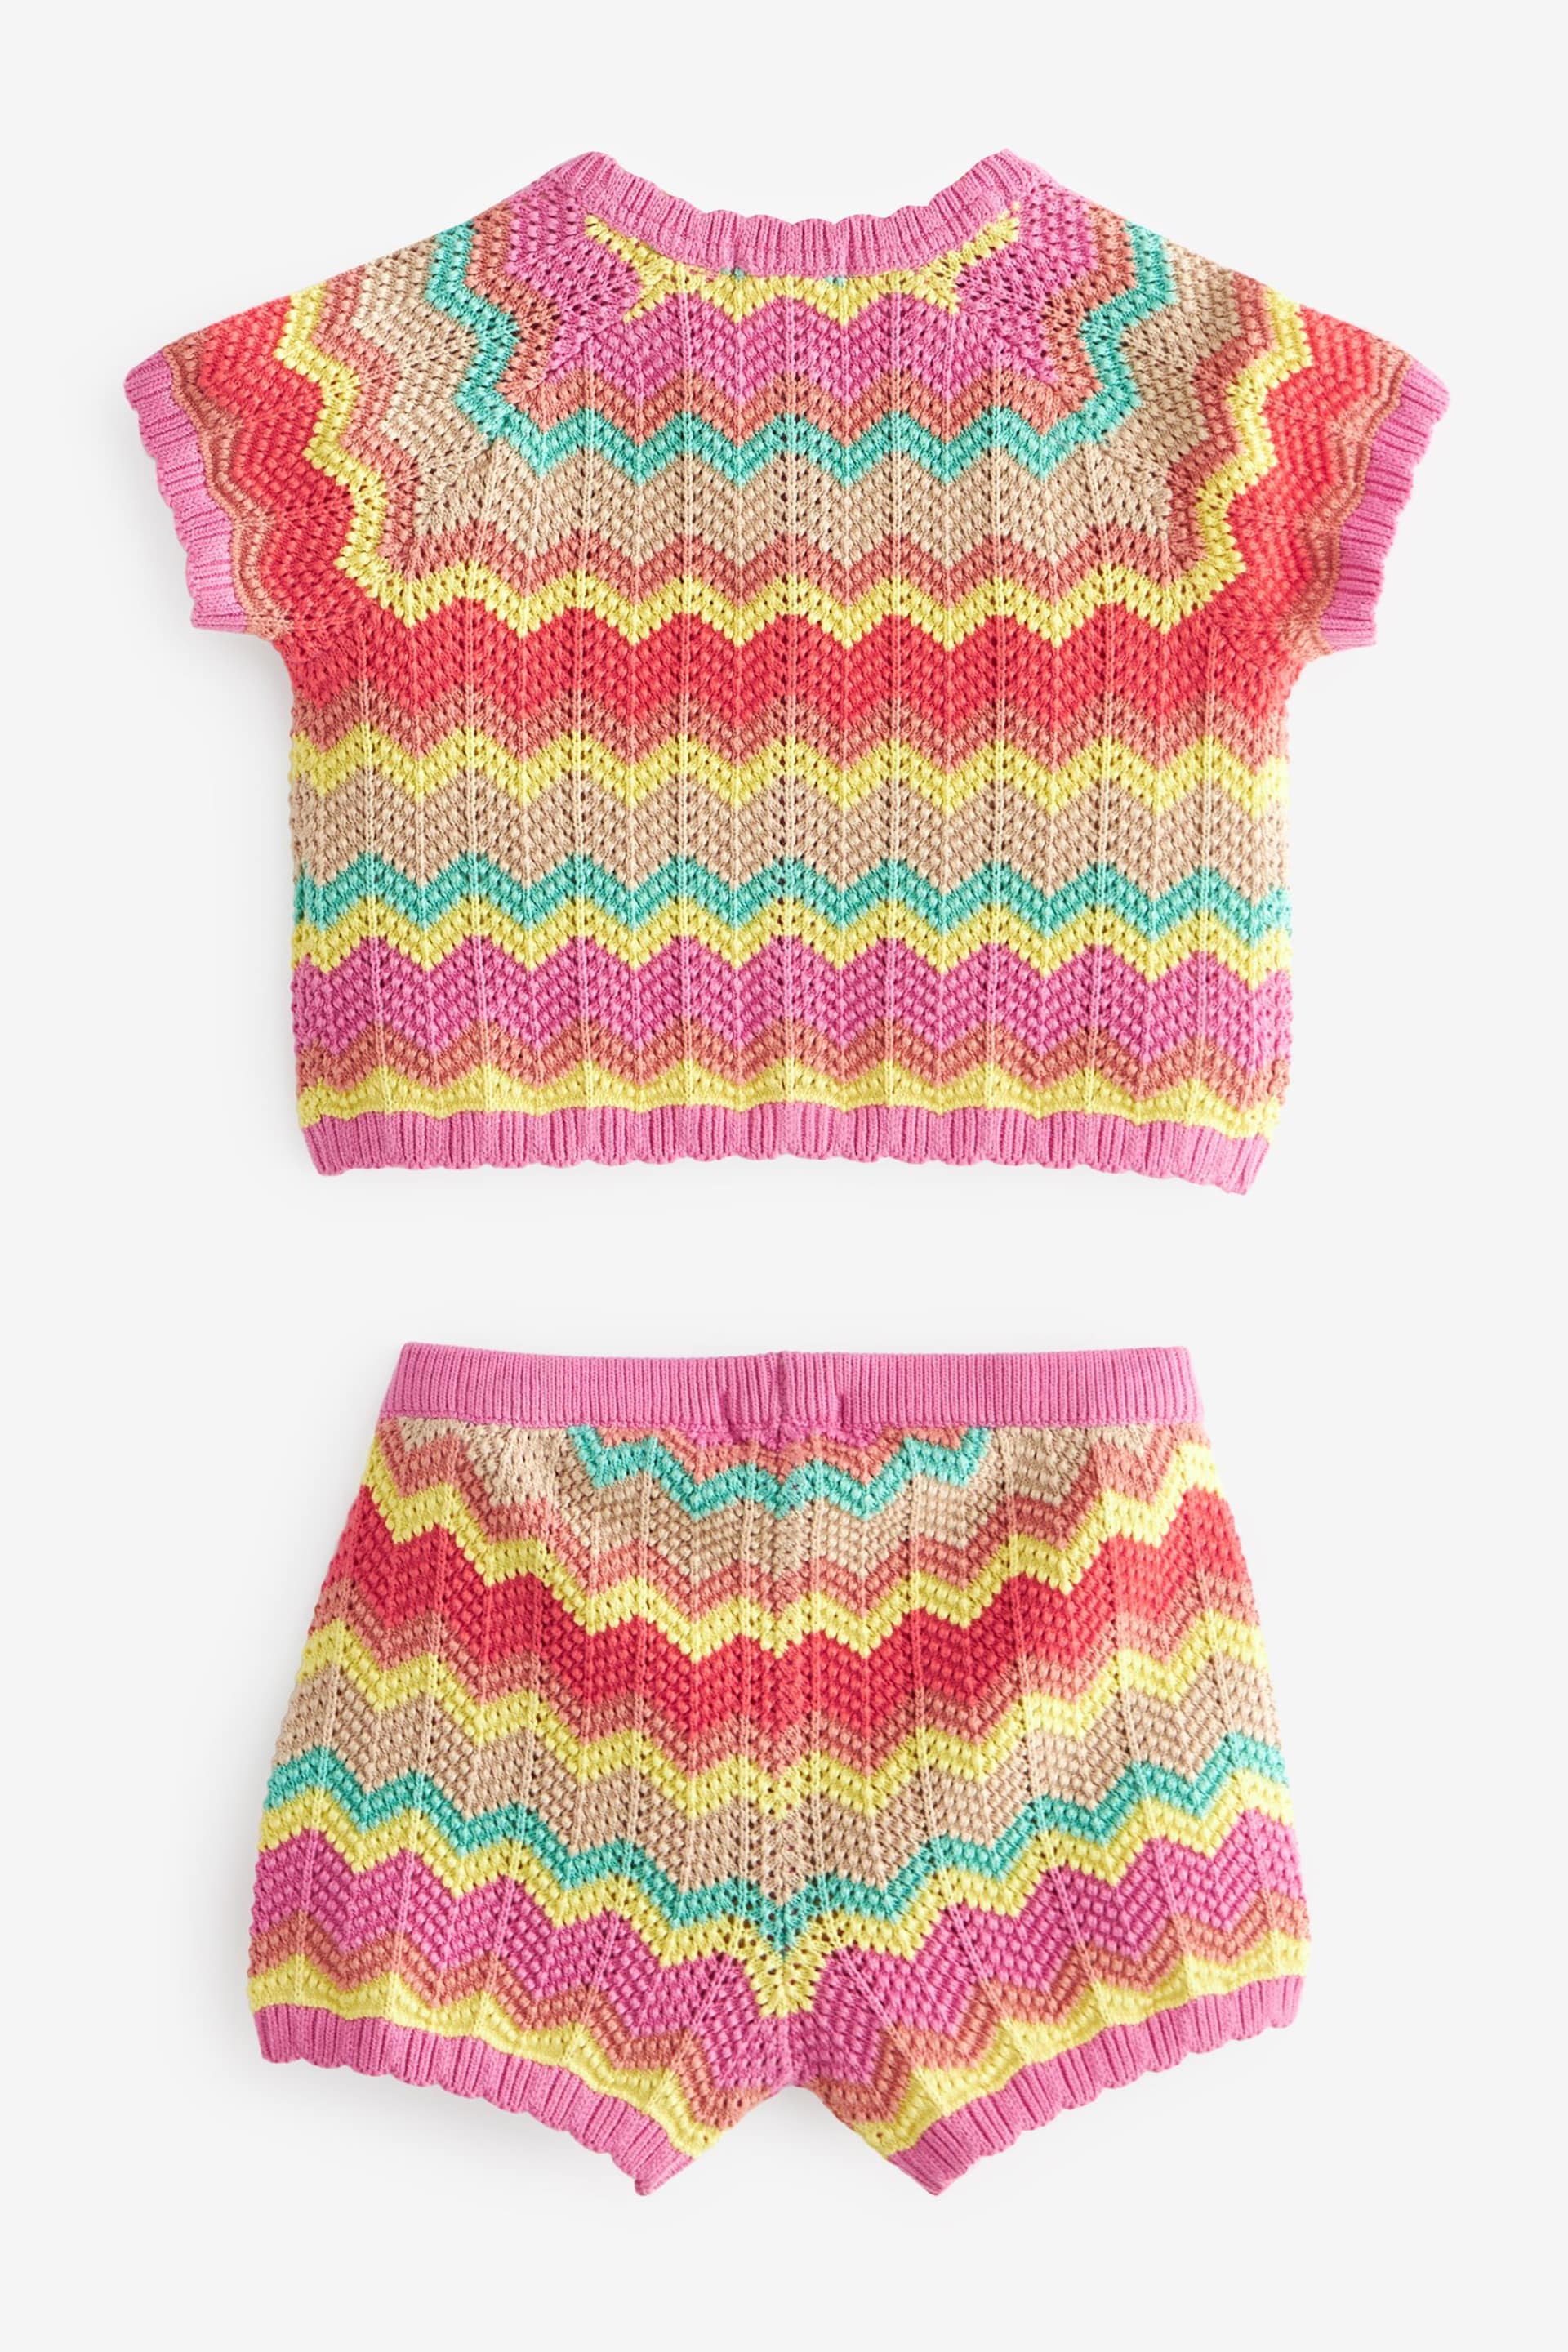 Ecru Marl Knitted Top And Short Set (3mths-7yrs) - Image 5 of 5